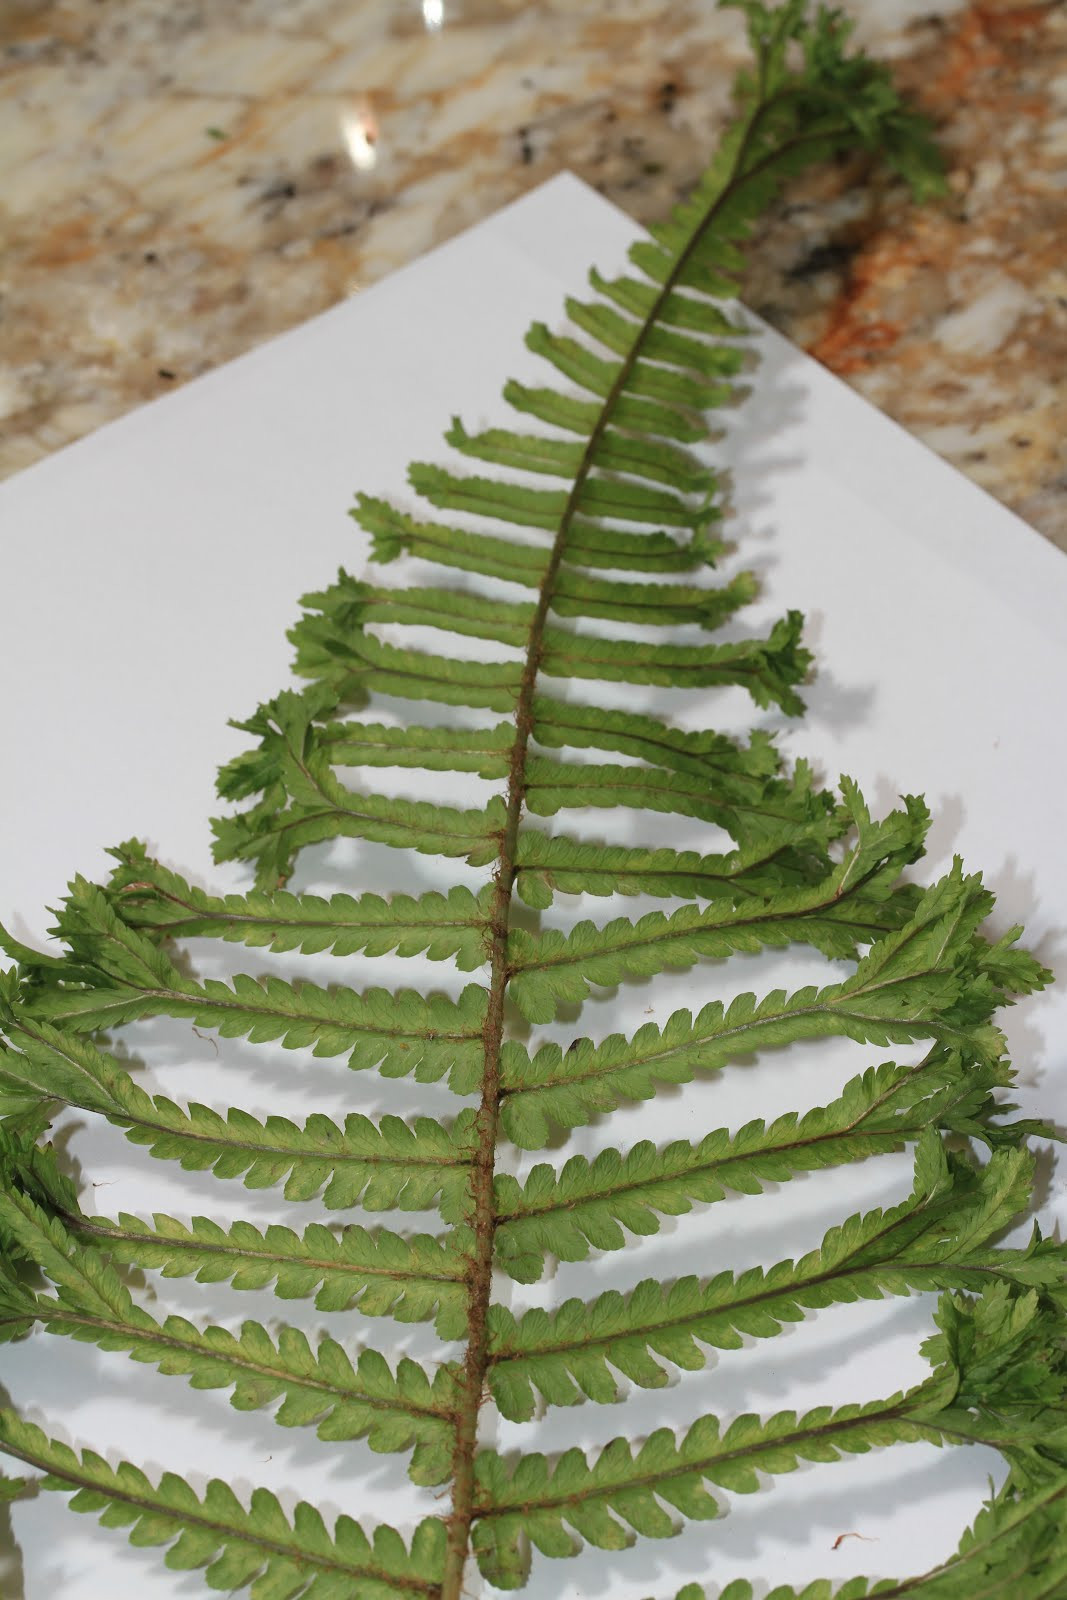 20 Awesome Weller Vase Value 2024 free download weller vase value of travelmarx february 2012 in dryopteris rachis frond